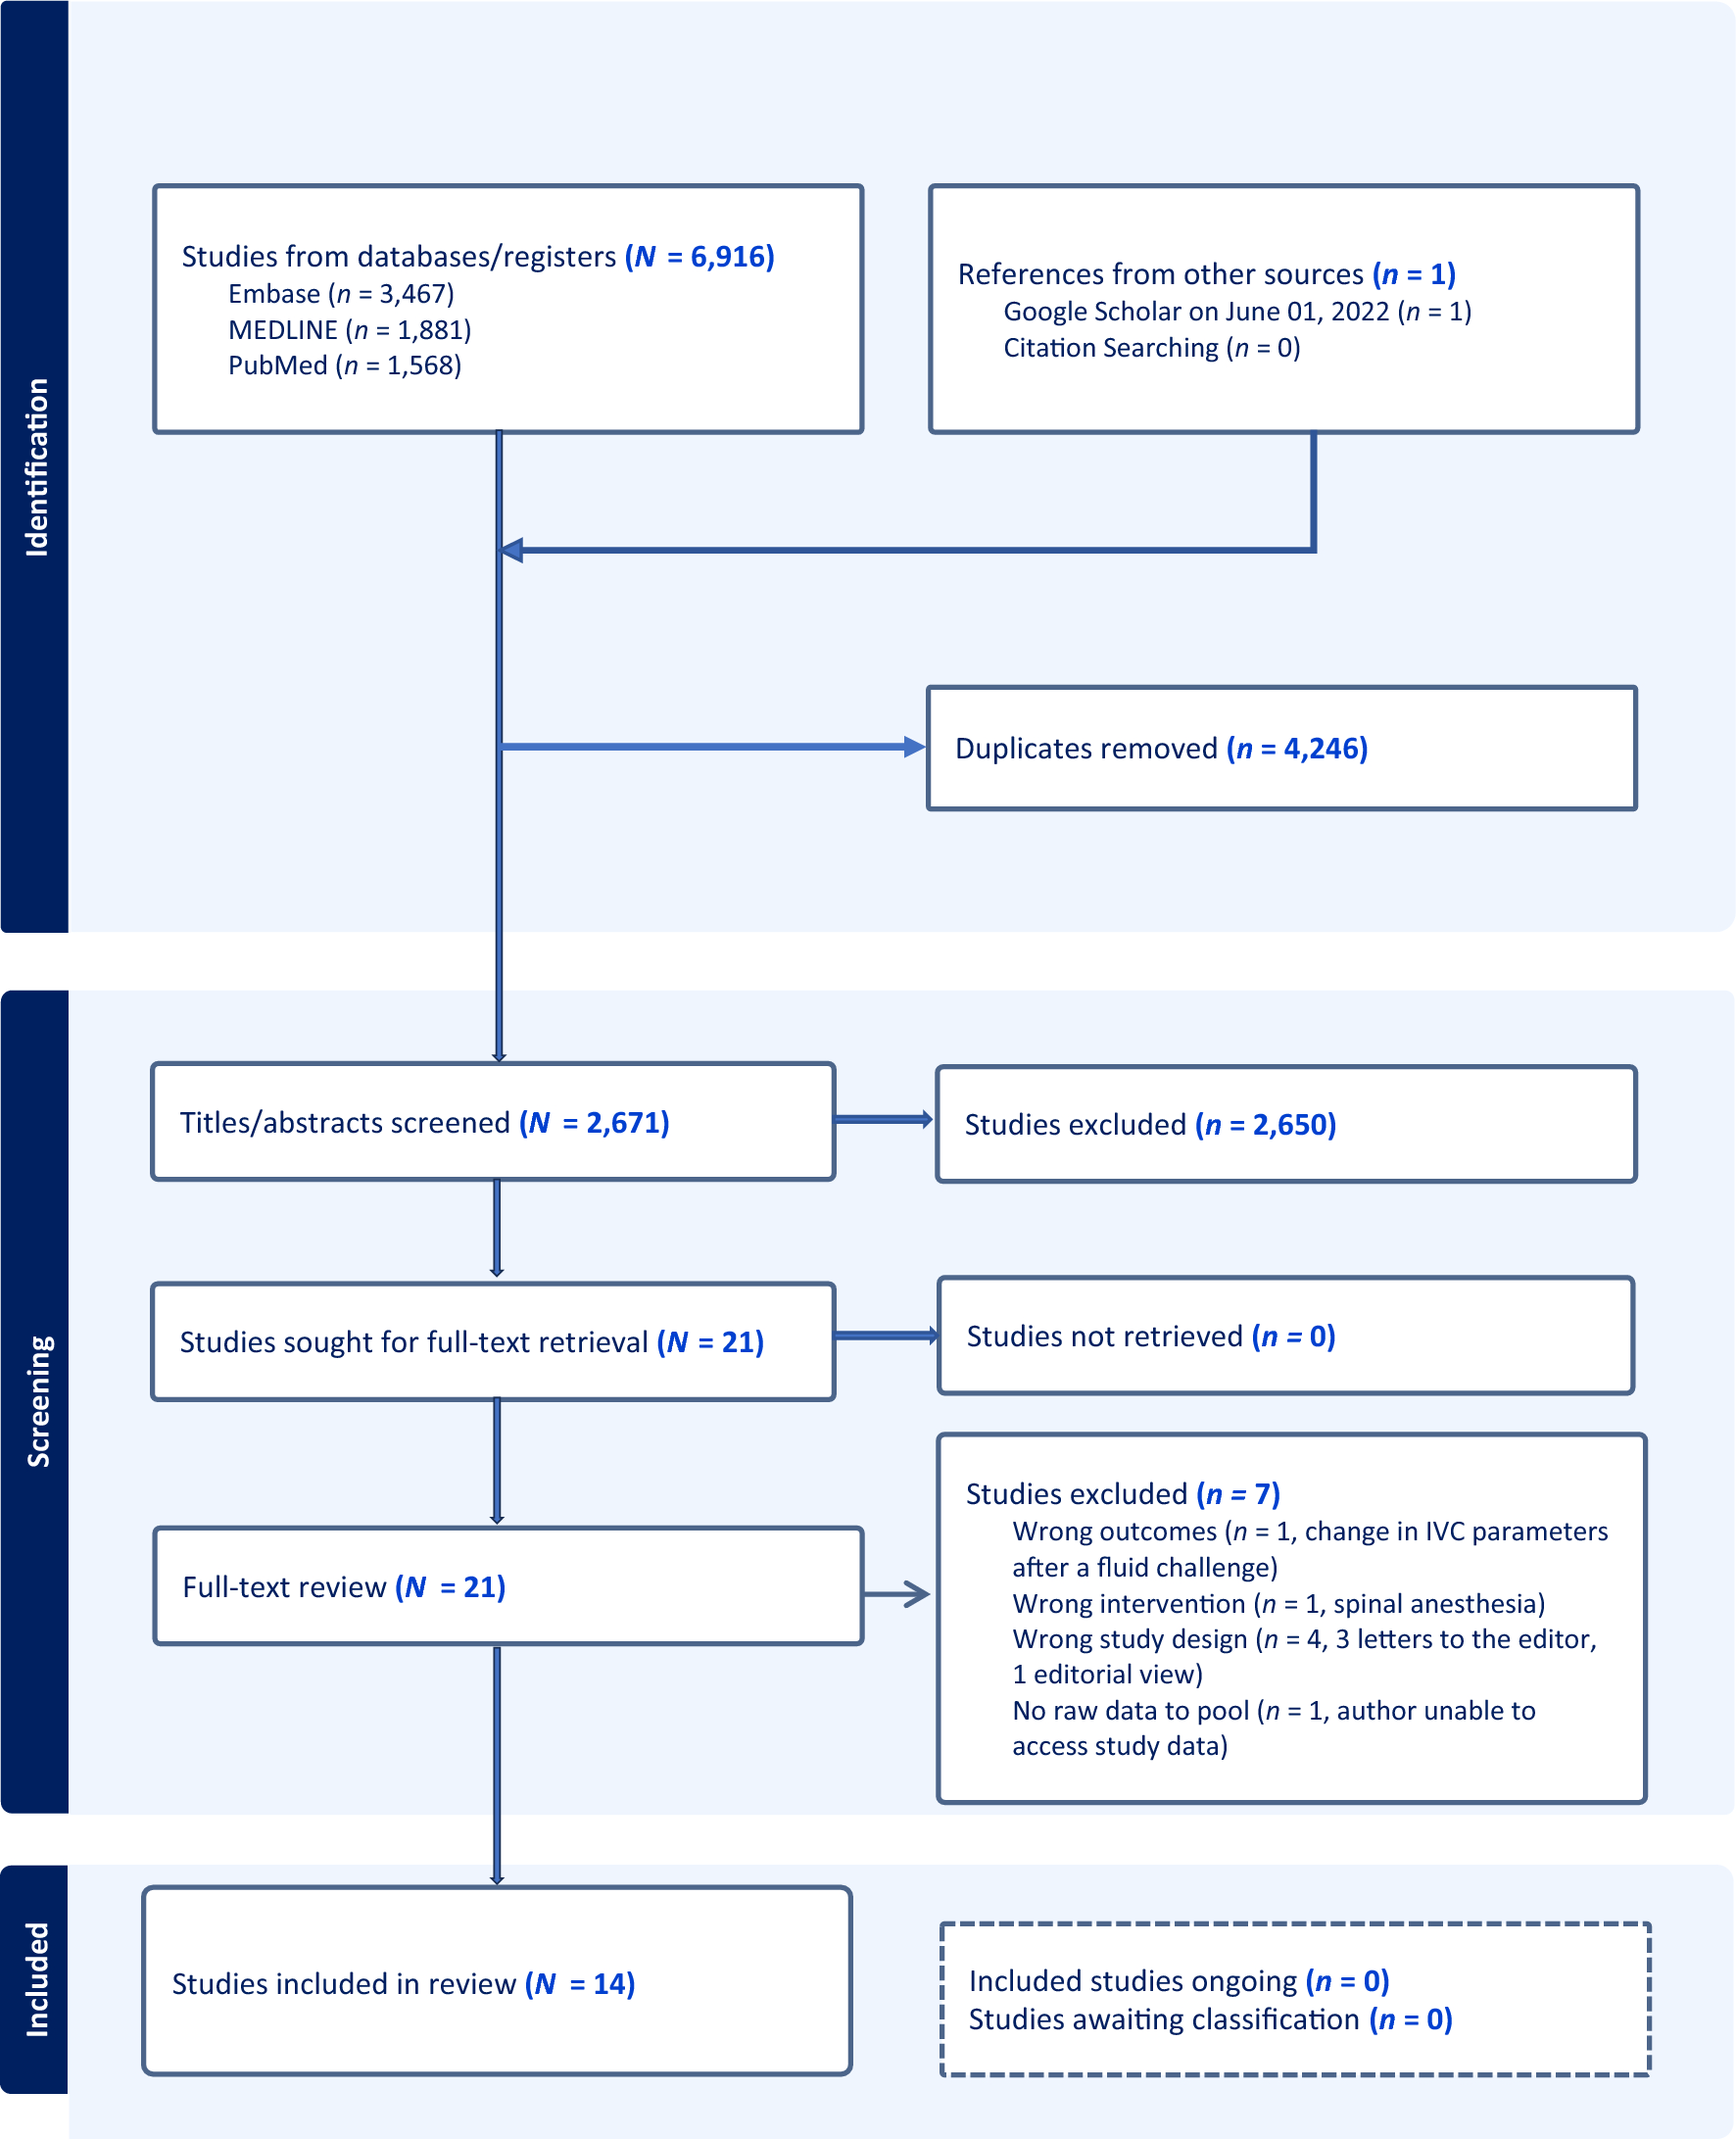 Inferior vena cava ultrasound to predict hypotension after general anesthesia induction: a systematic review and meta-analysis of observational studies